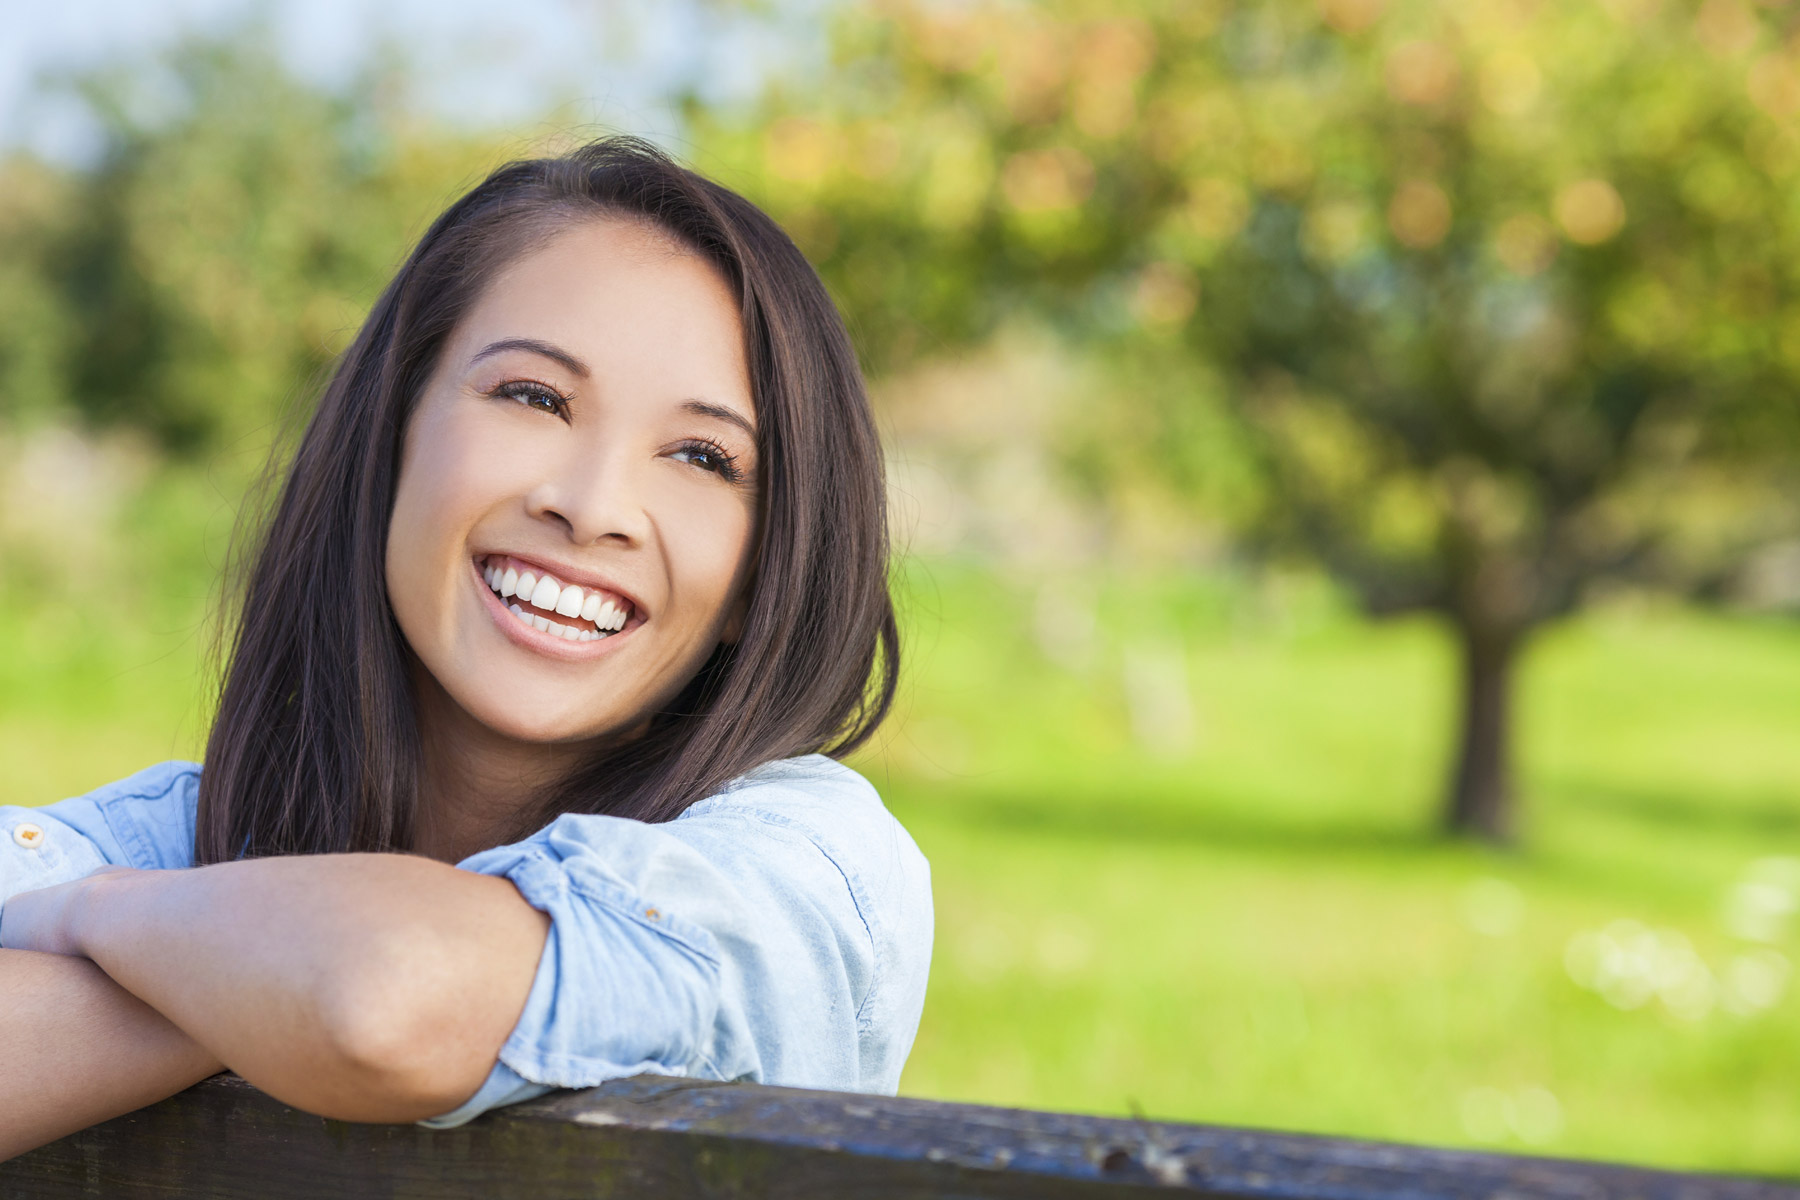 Smiling Woman at Fence